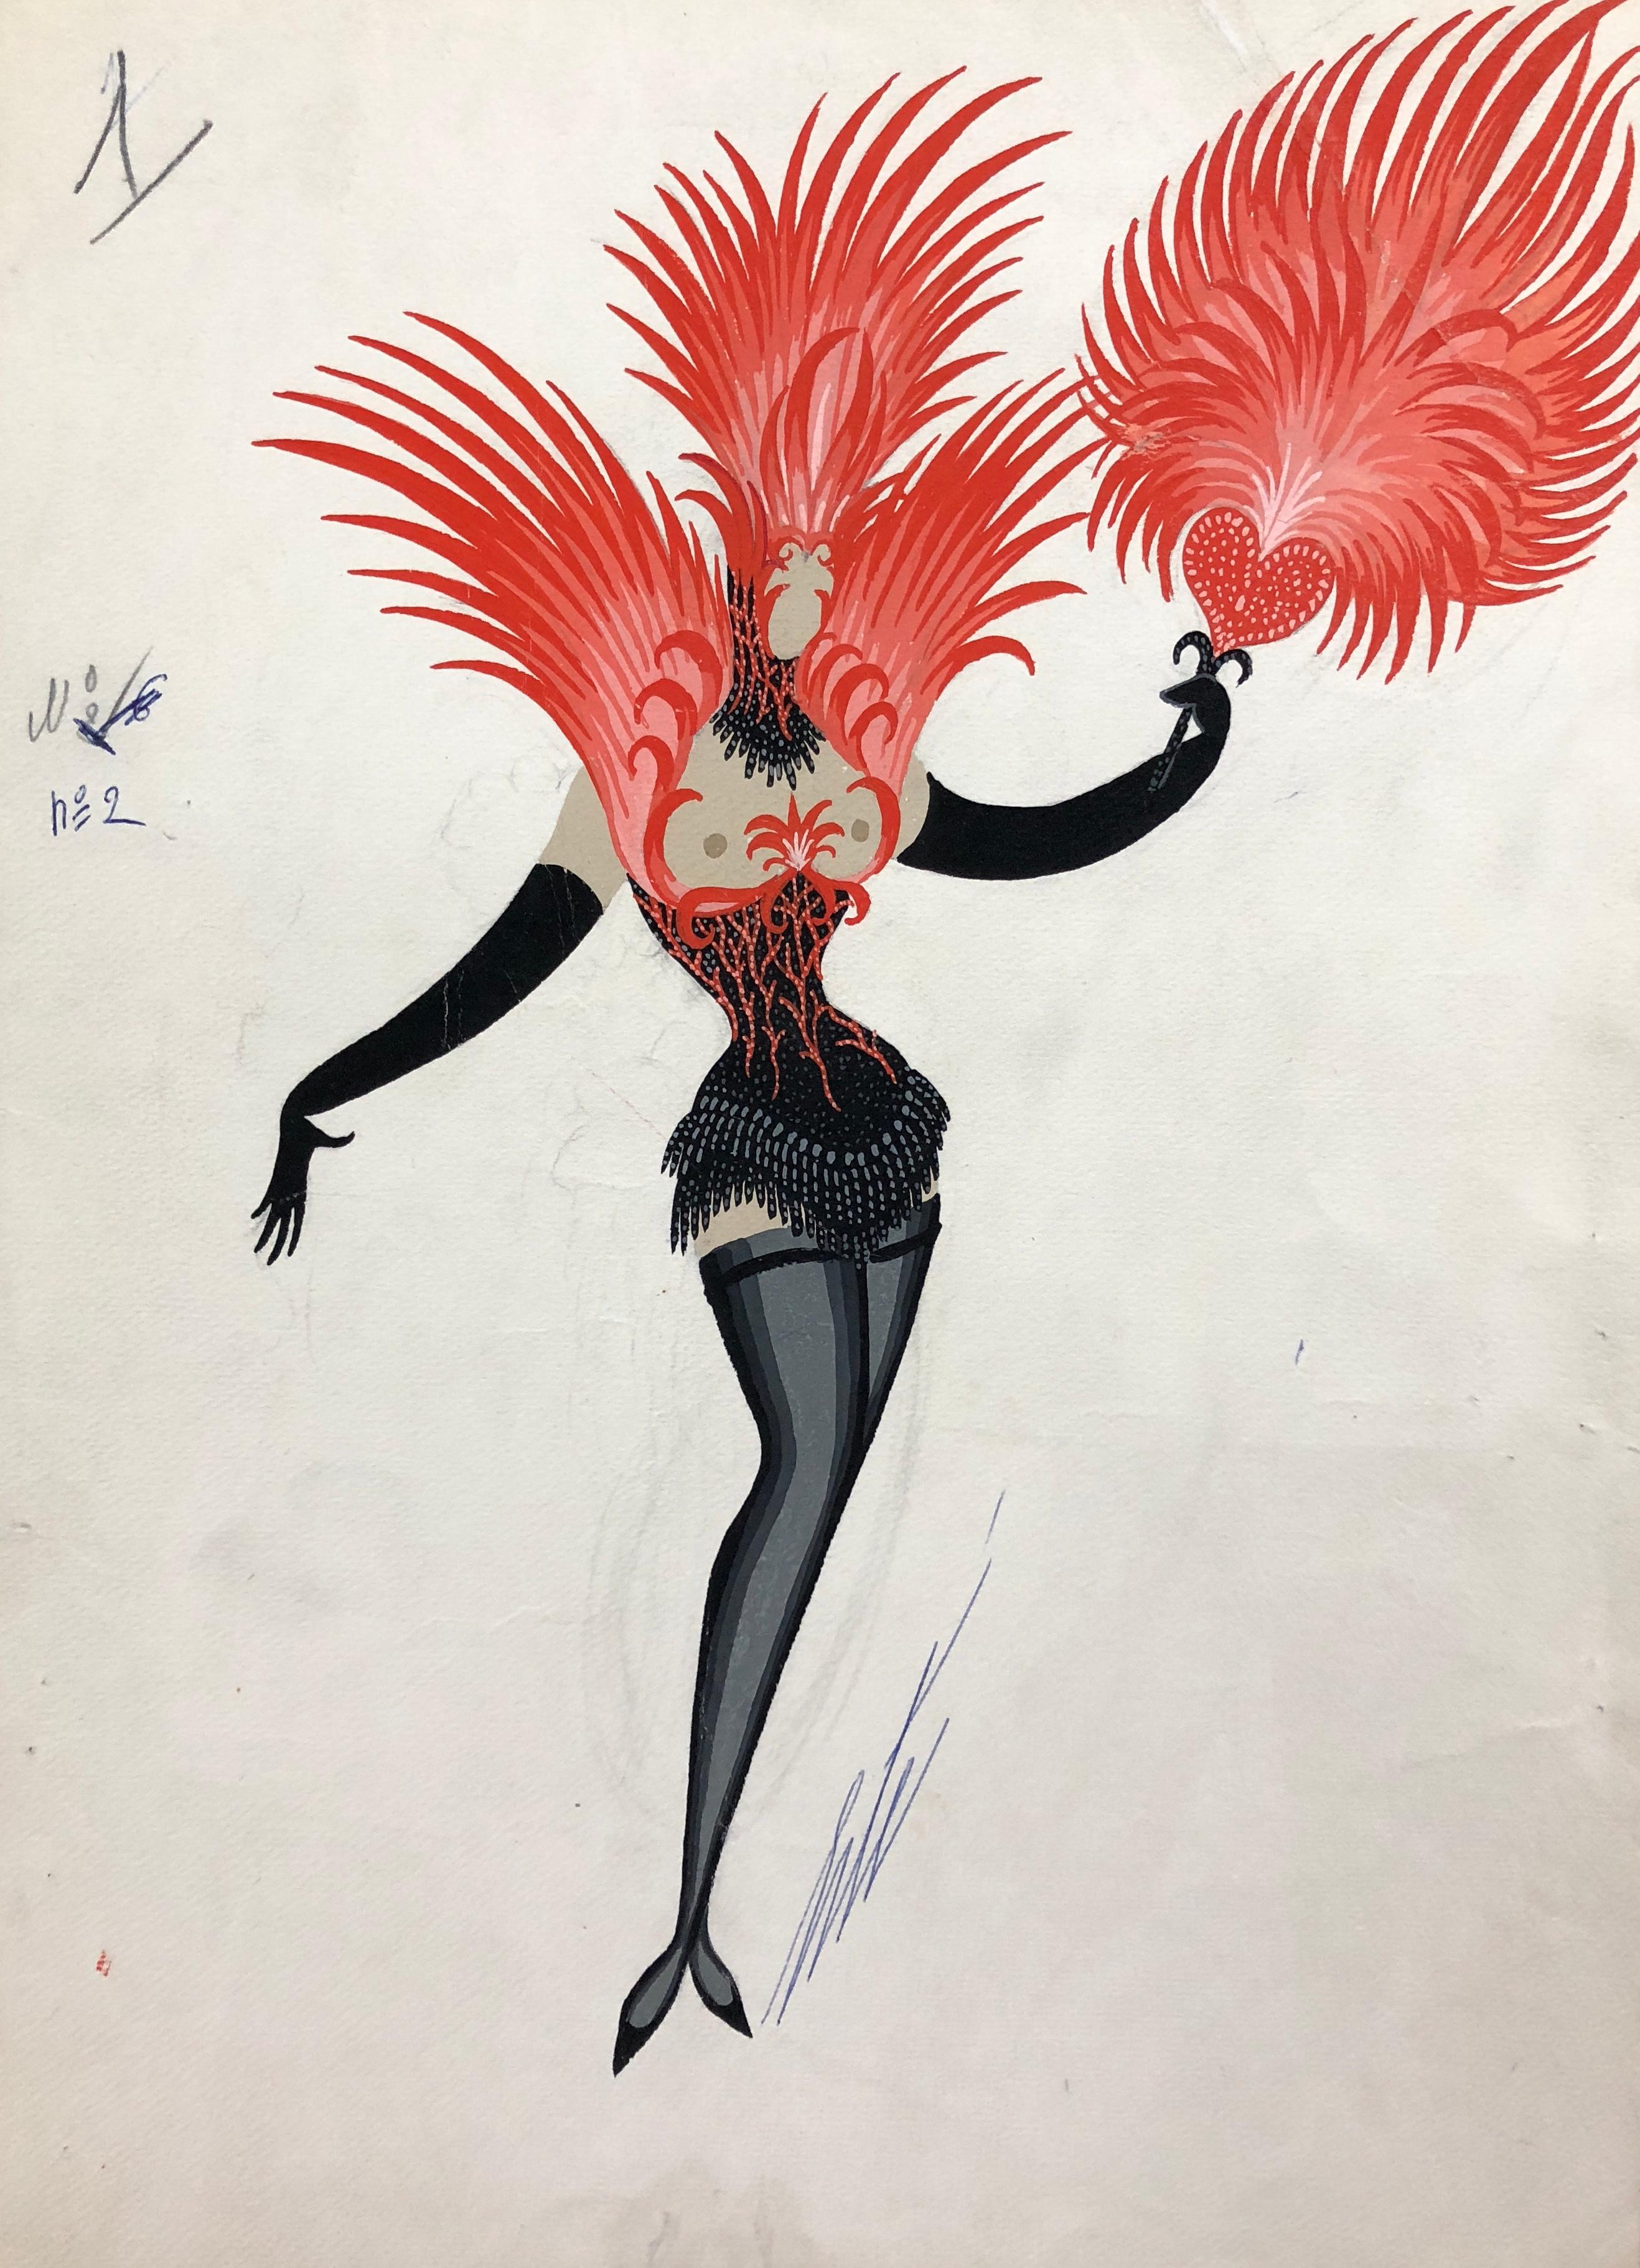 This piece is a unique, original gouache on paper by Erte, also known as Romain de Tirtoff. Erte was a vastly diverse artist who excelled in an array of fields including fashion, jewelry, graphic arts, costume and set design for film, theatre,